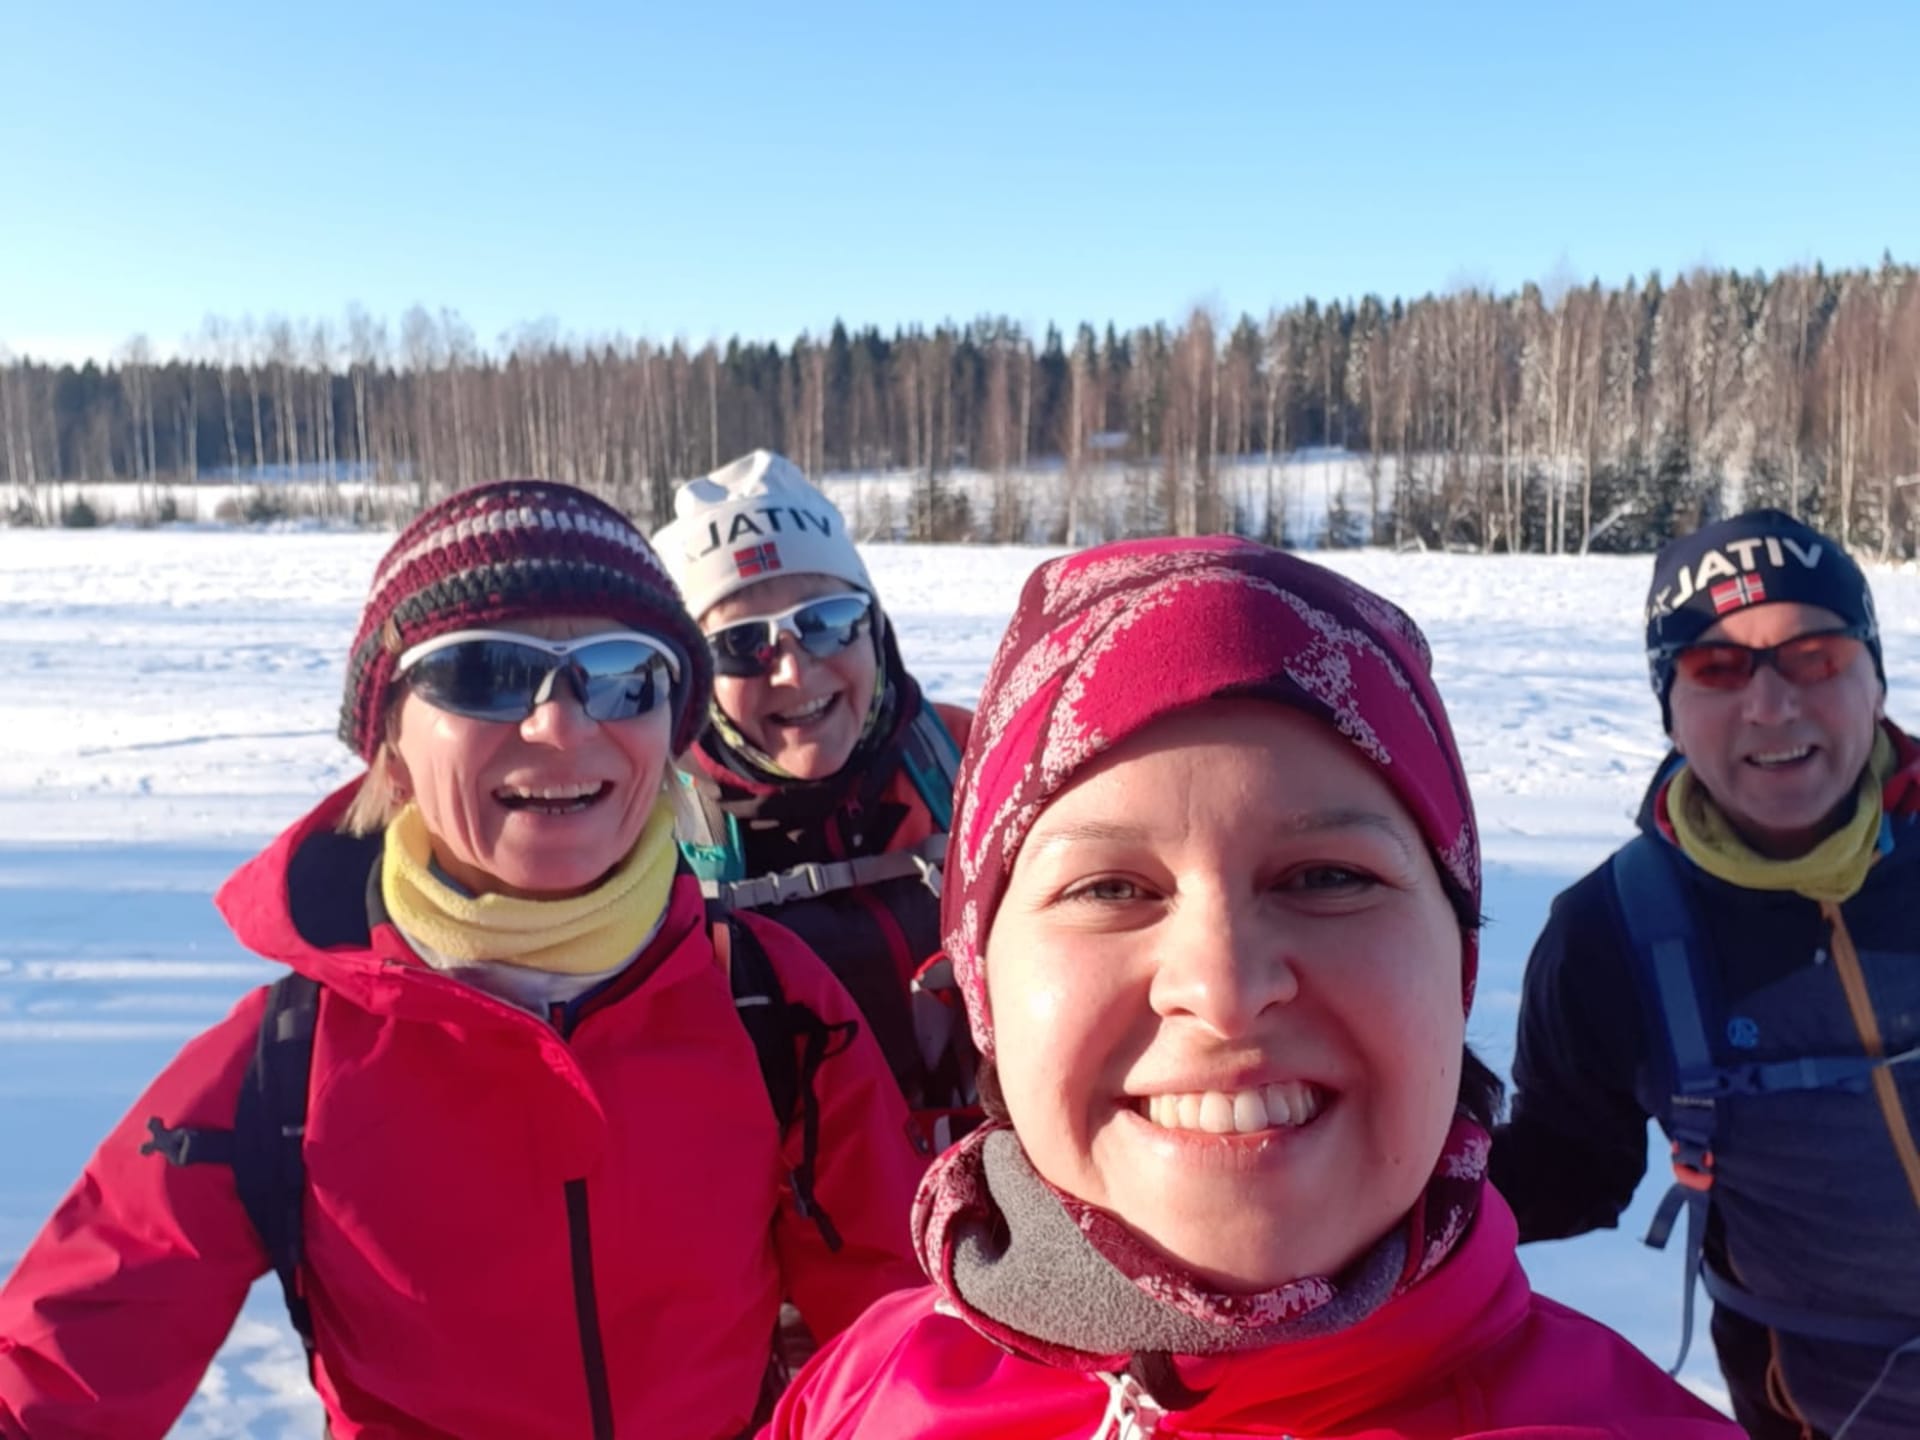 From guesthouse to guesthouse cross country skiing